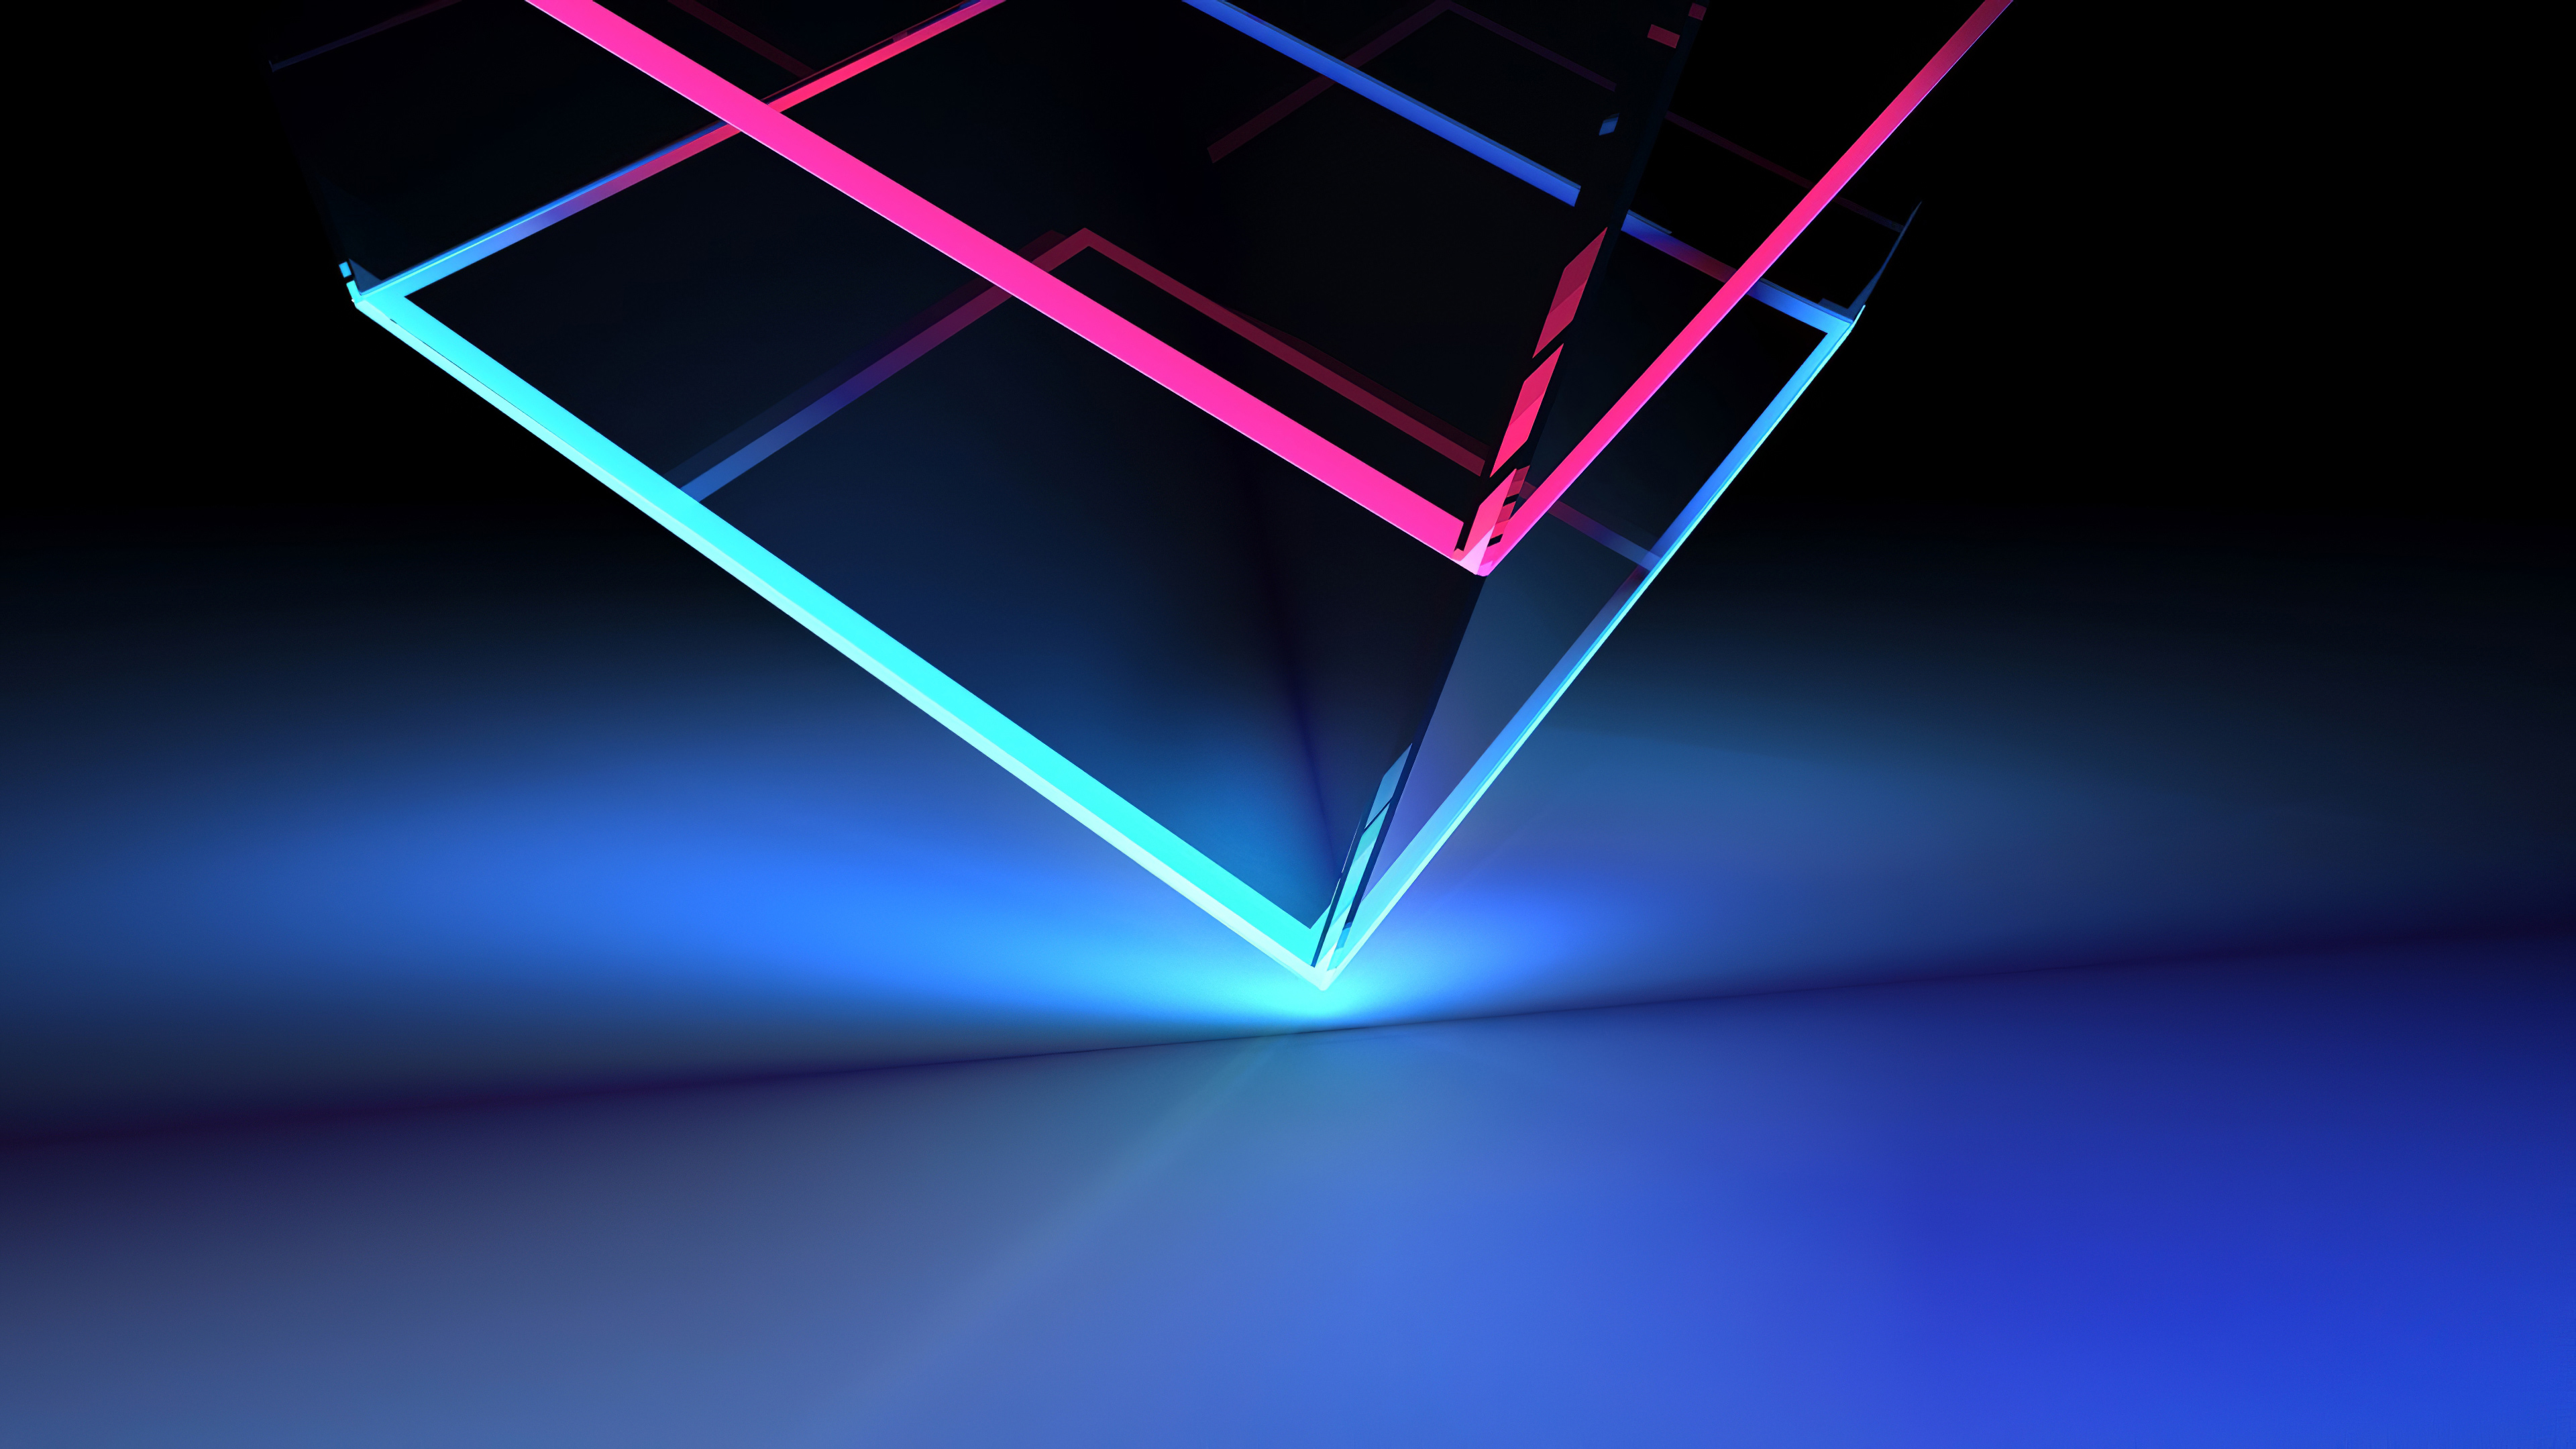 Neon Cube Abstract Shapes Wallpaper 4k